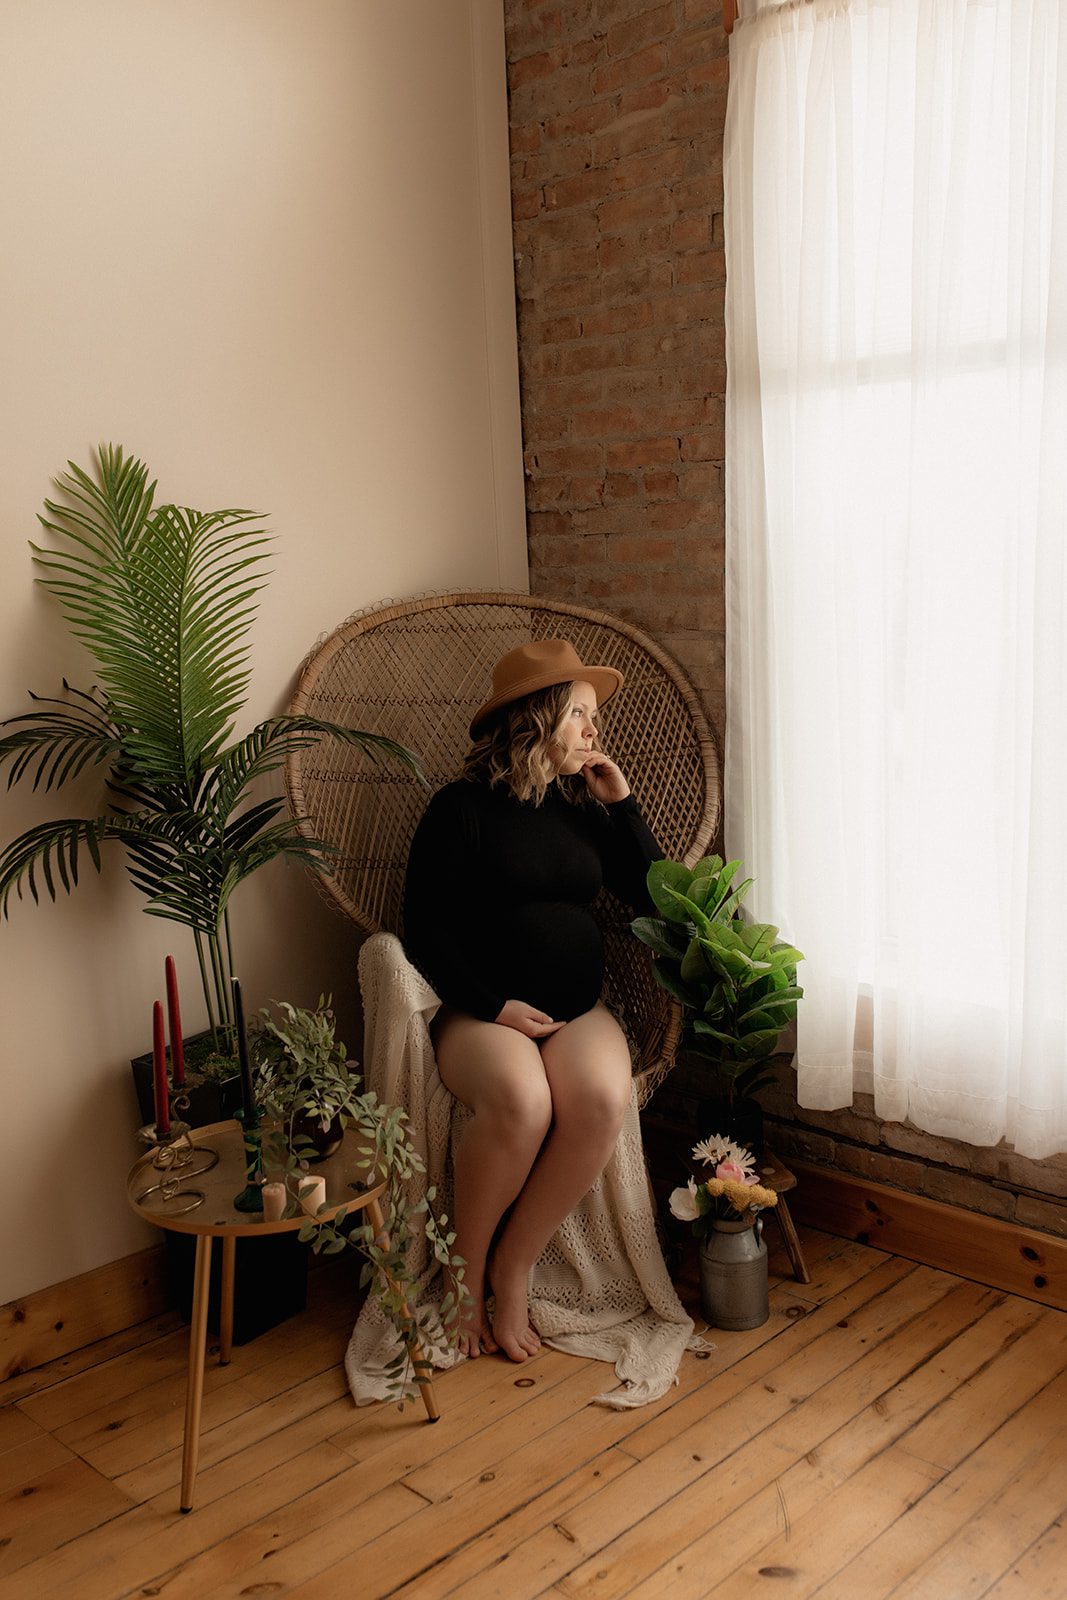 A mom to be sits in a large wicker chair surrounded by candles and plants looking out a large window